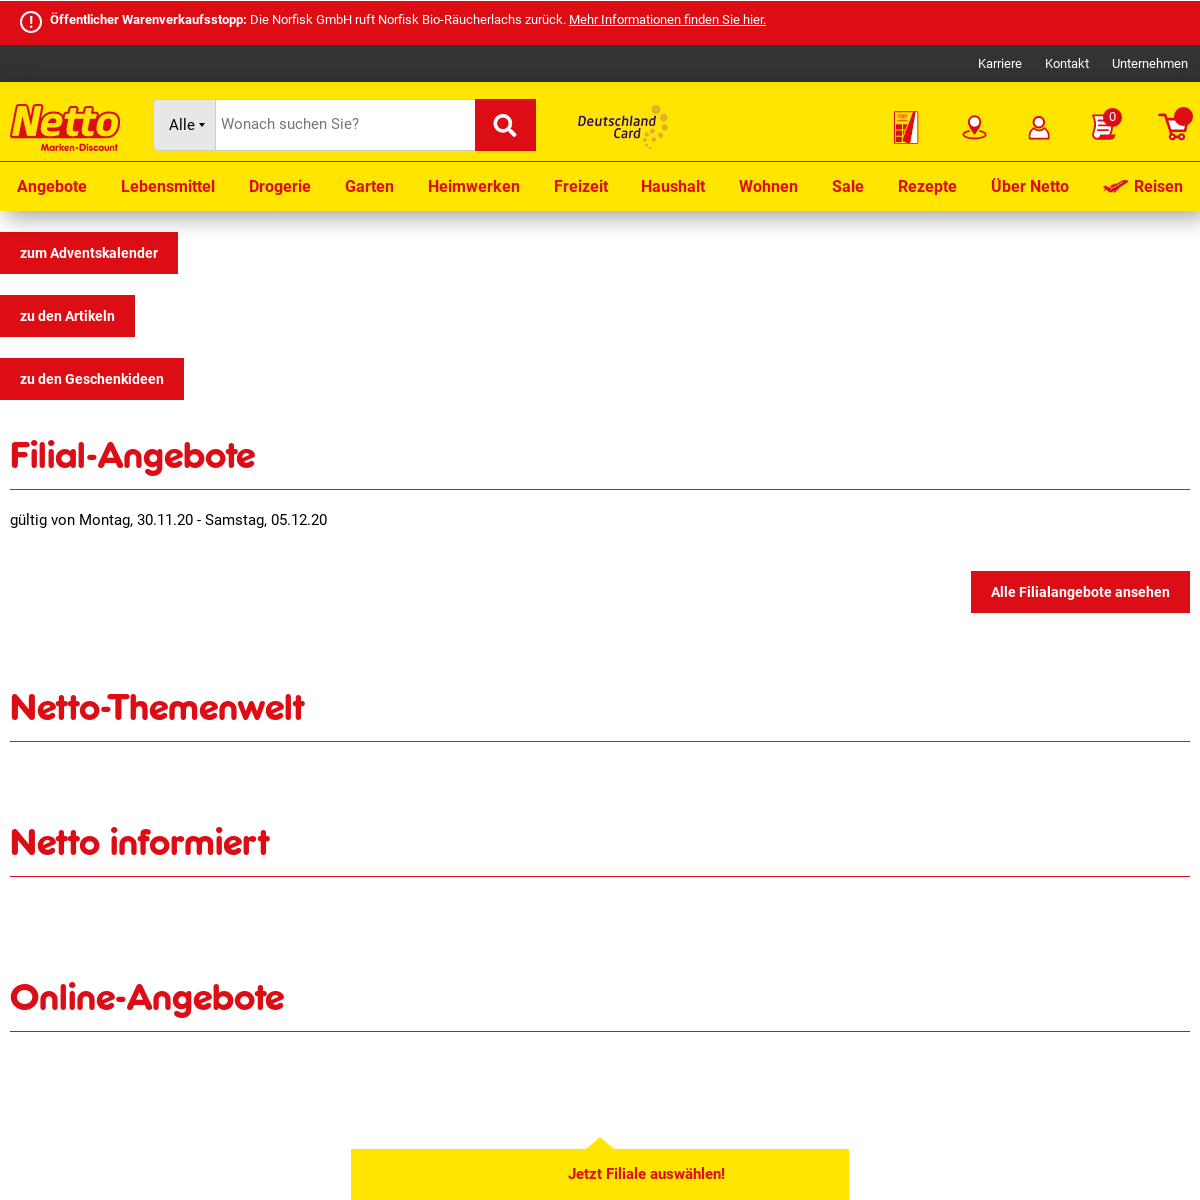 A complete backup of netto-online.de